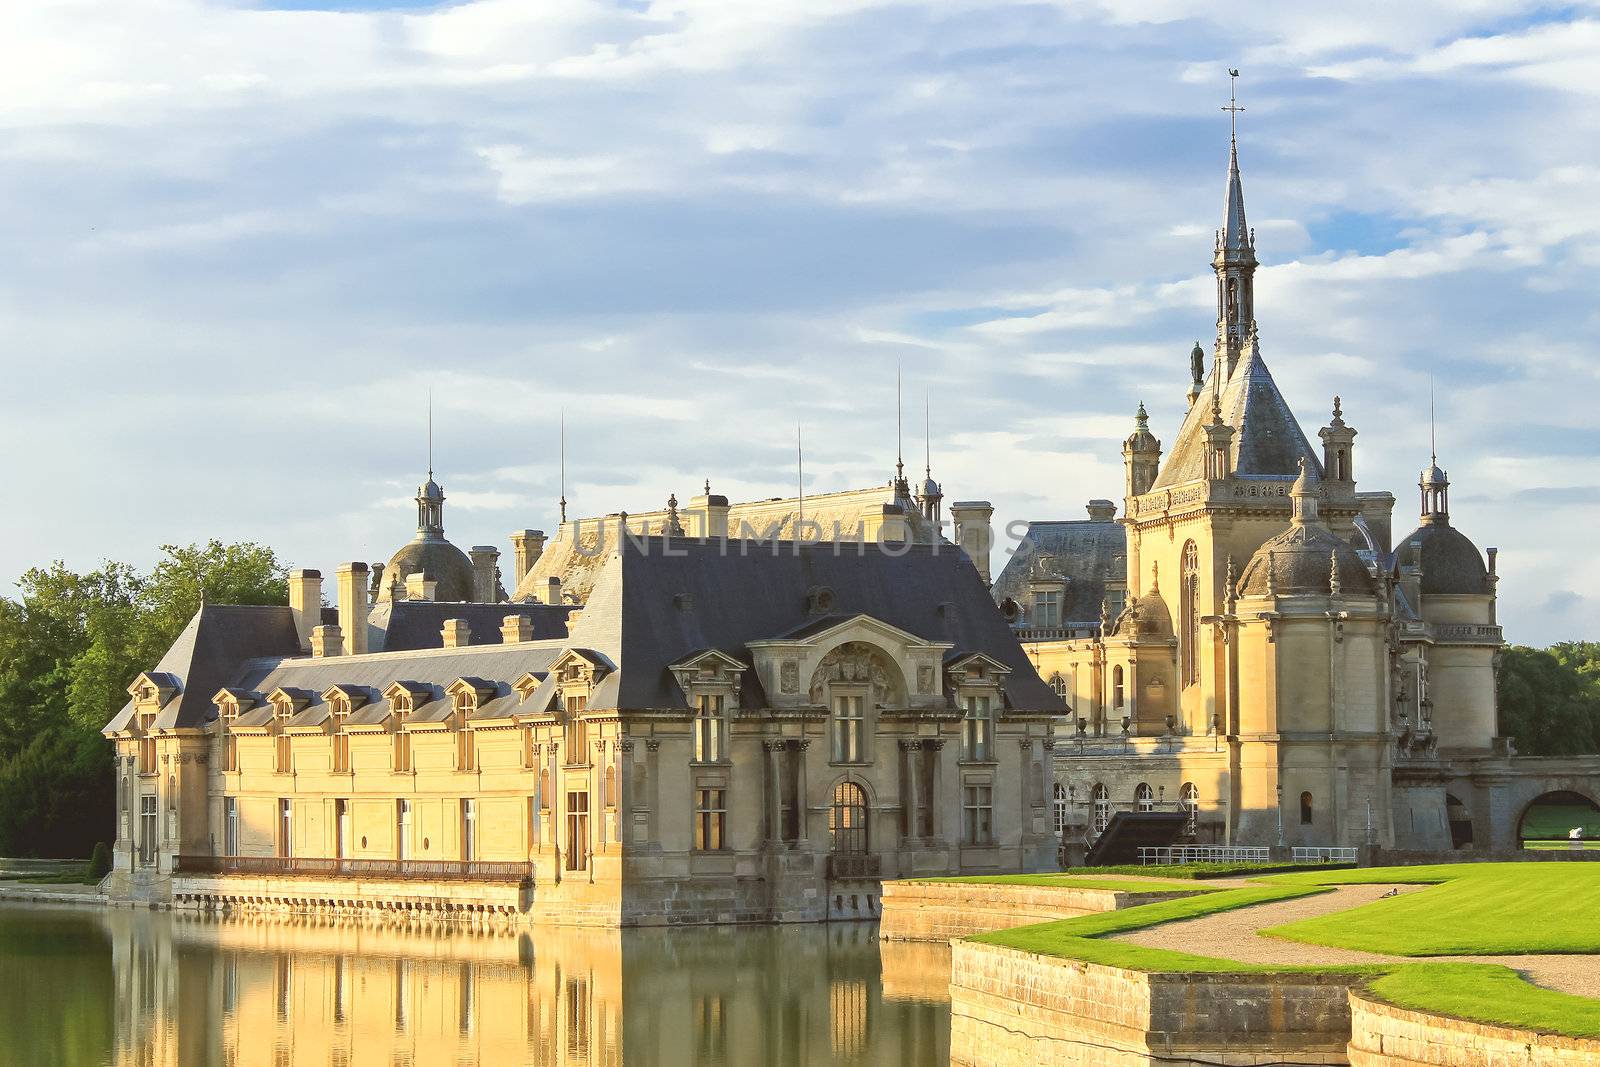 Castle of Chantilly at sunset. France by NickNick